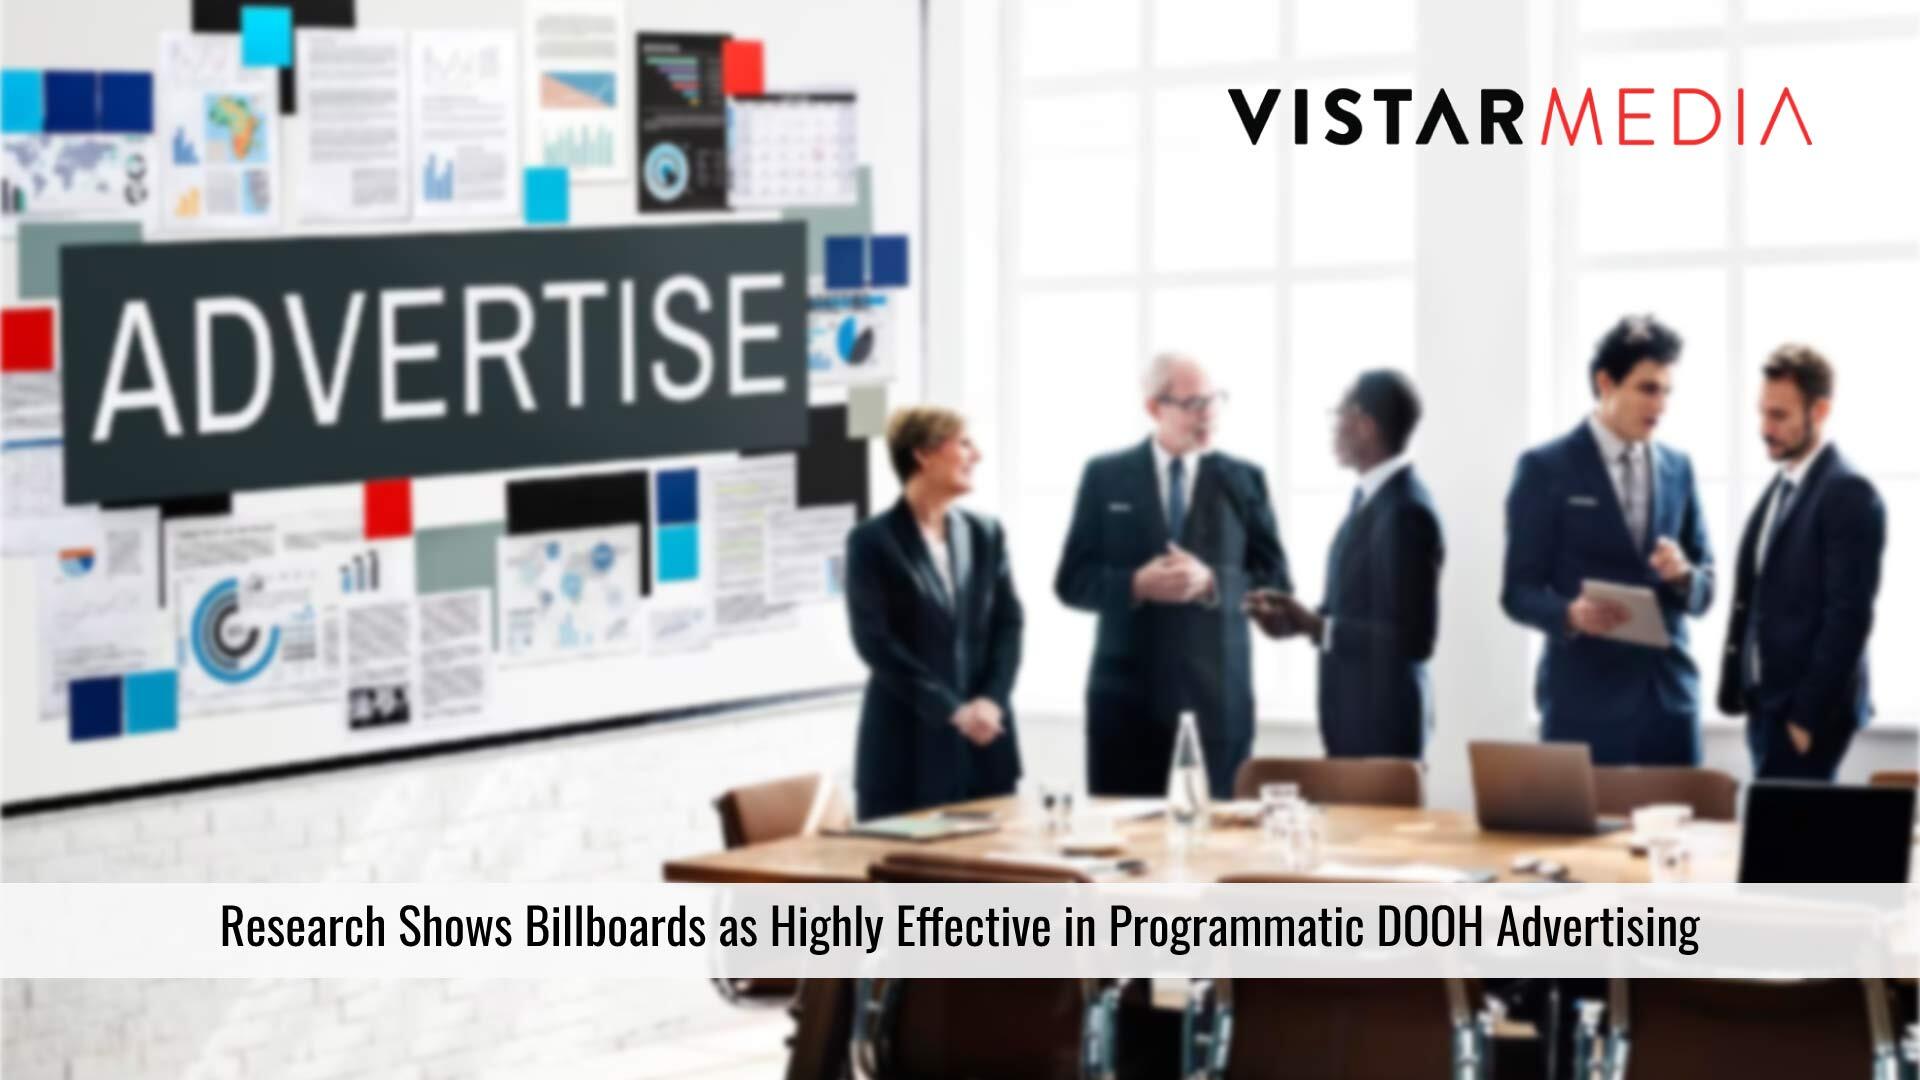 New Research Reaffirms Billboards as Highly Effective Venue in Programmatic DOOH Advertising